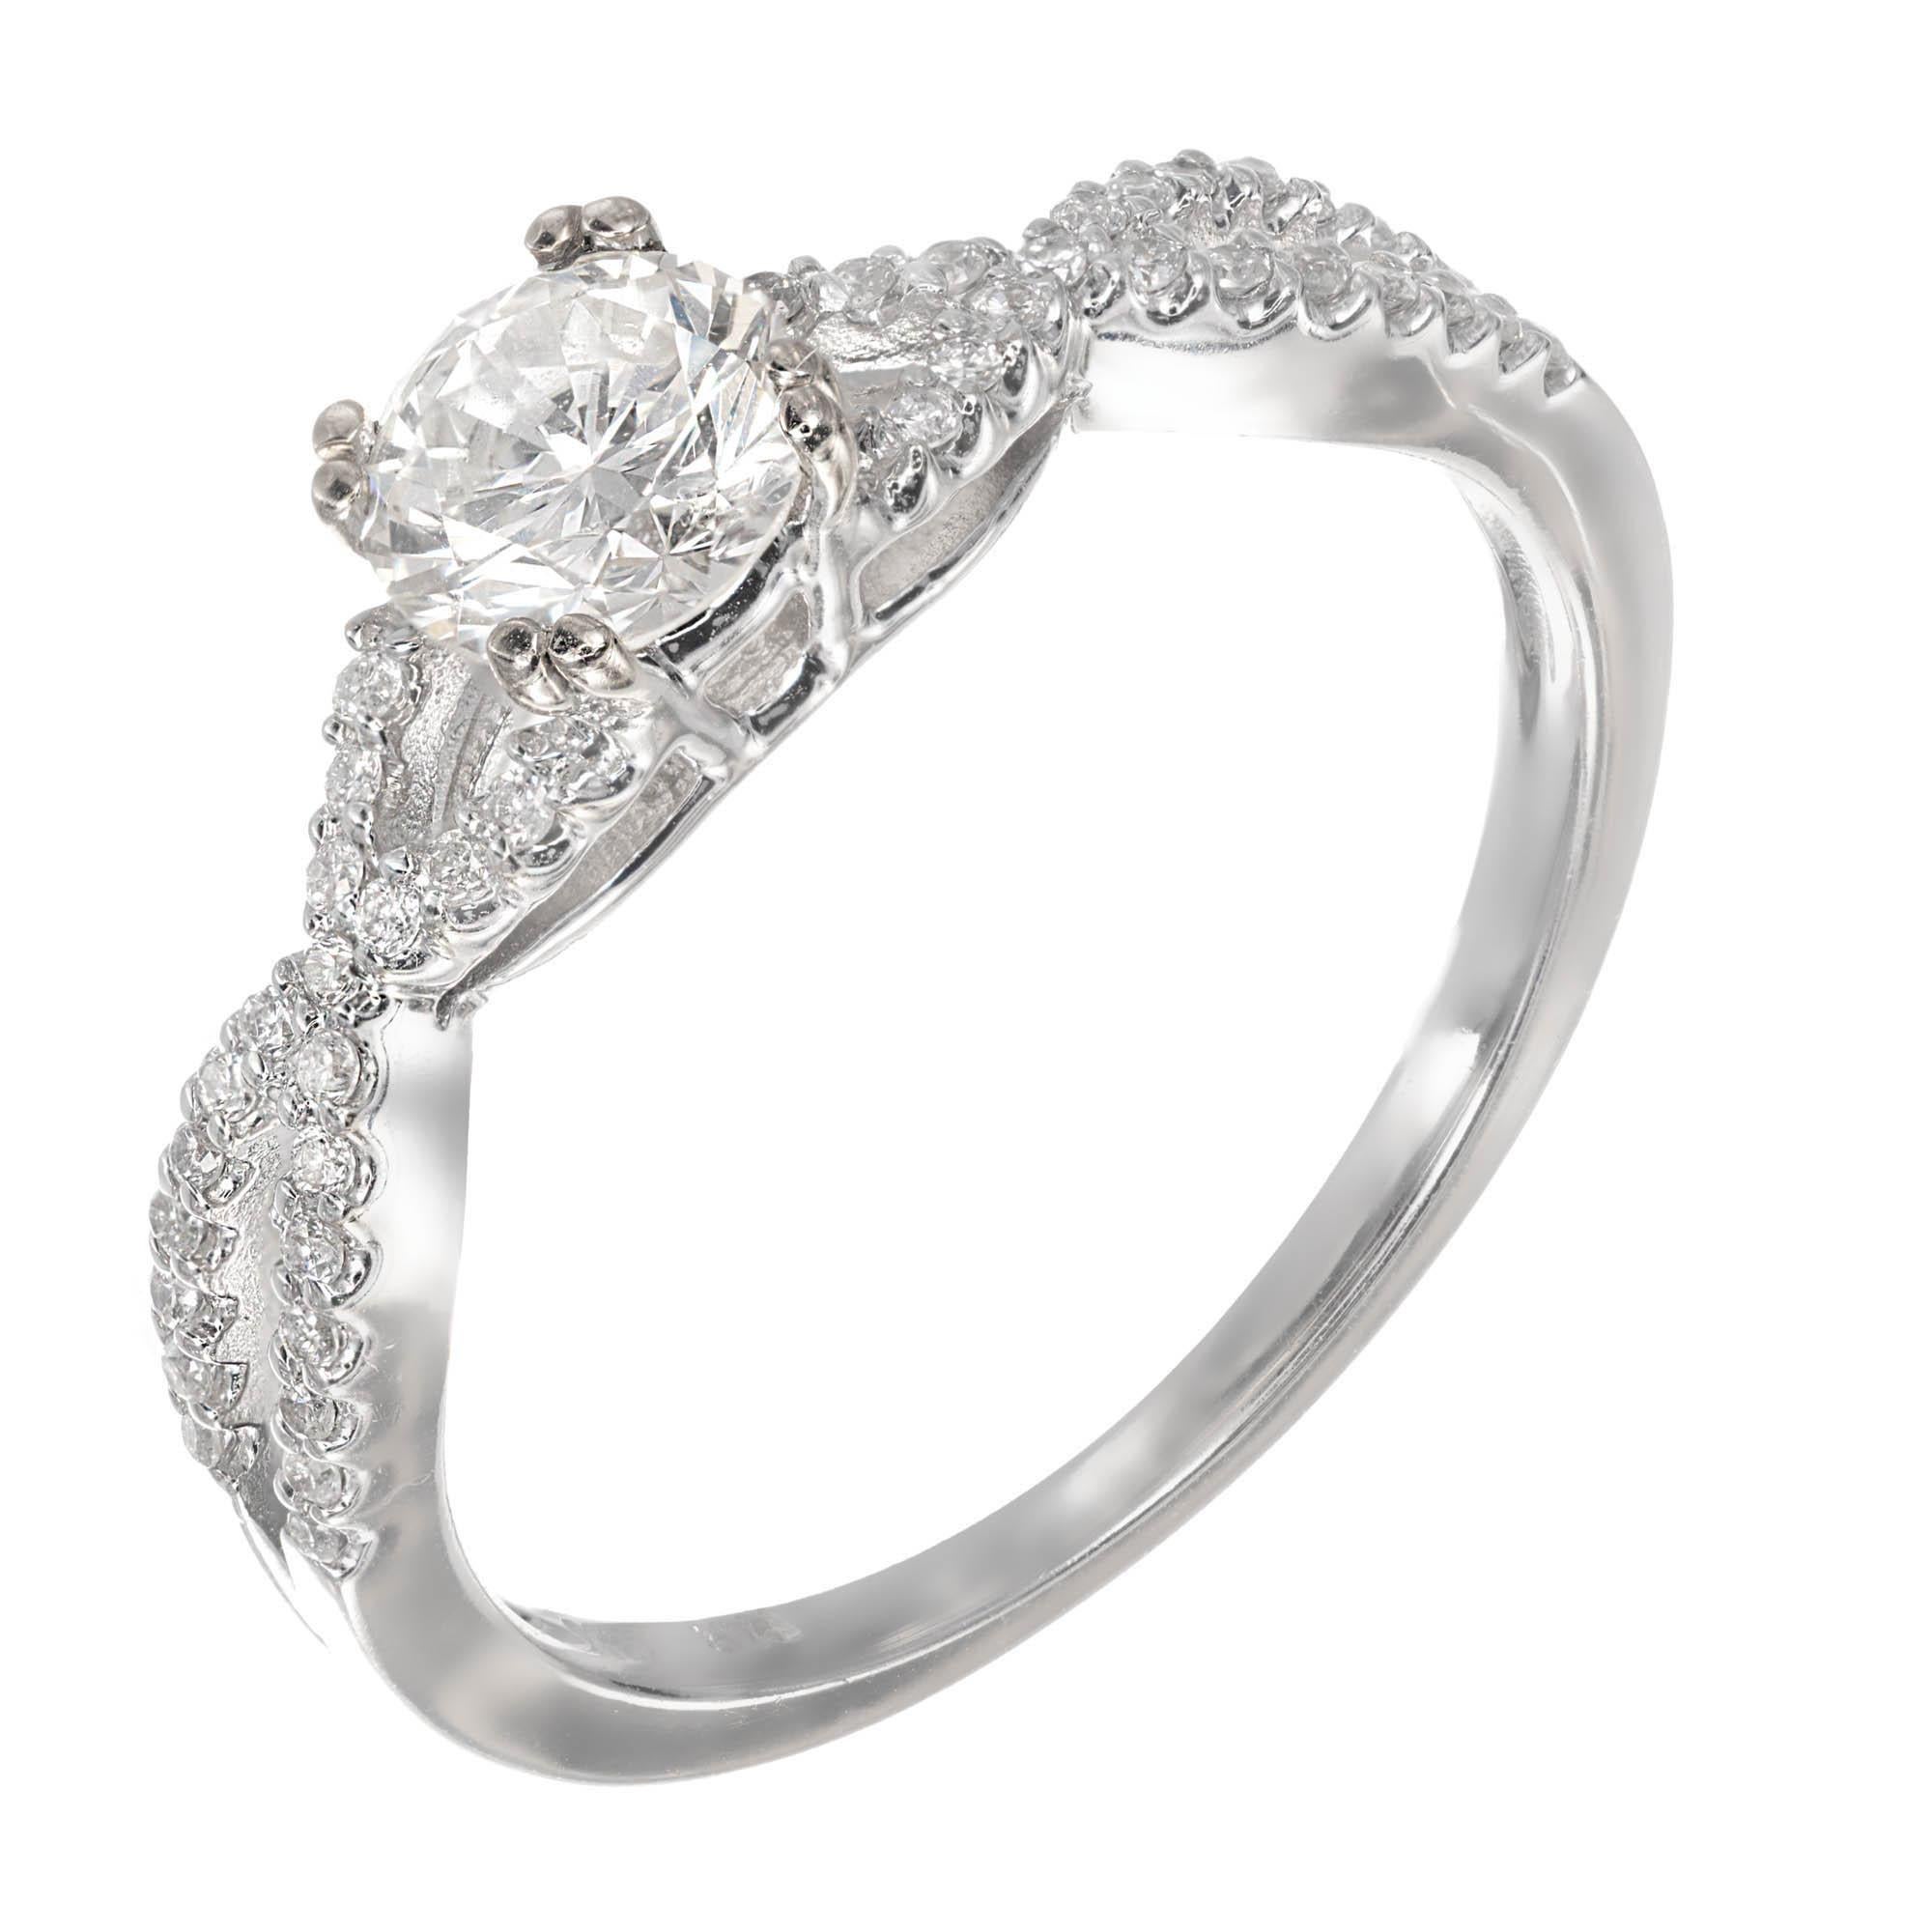 Intertwined 14k white gold diamond engagement ring with a bright sparkly white center diamond. The 2 rows of full cut diamonds join to hold the center diamond.

1 round brilliant cut diamond, approx. total weight .59ct, I, SI1, EGL certificate